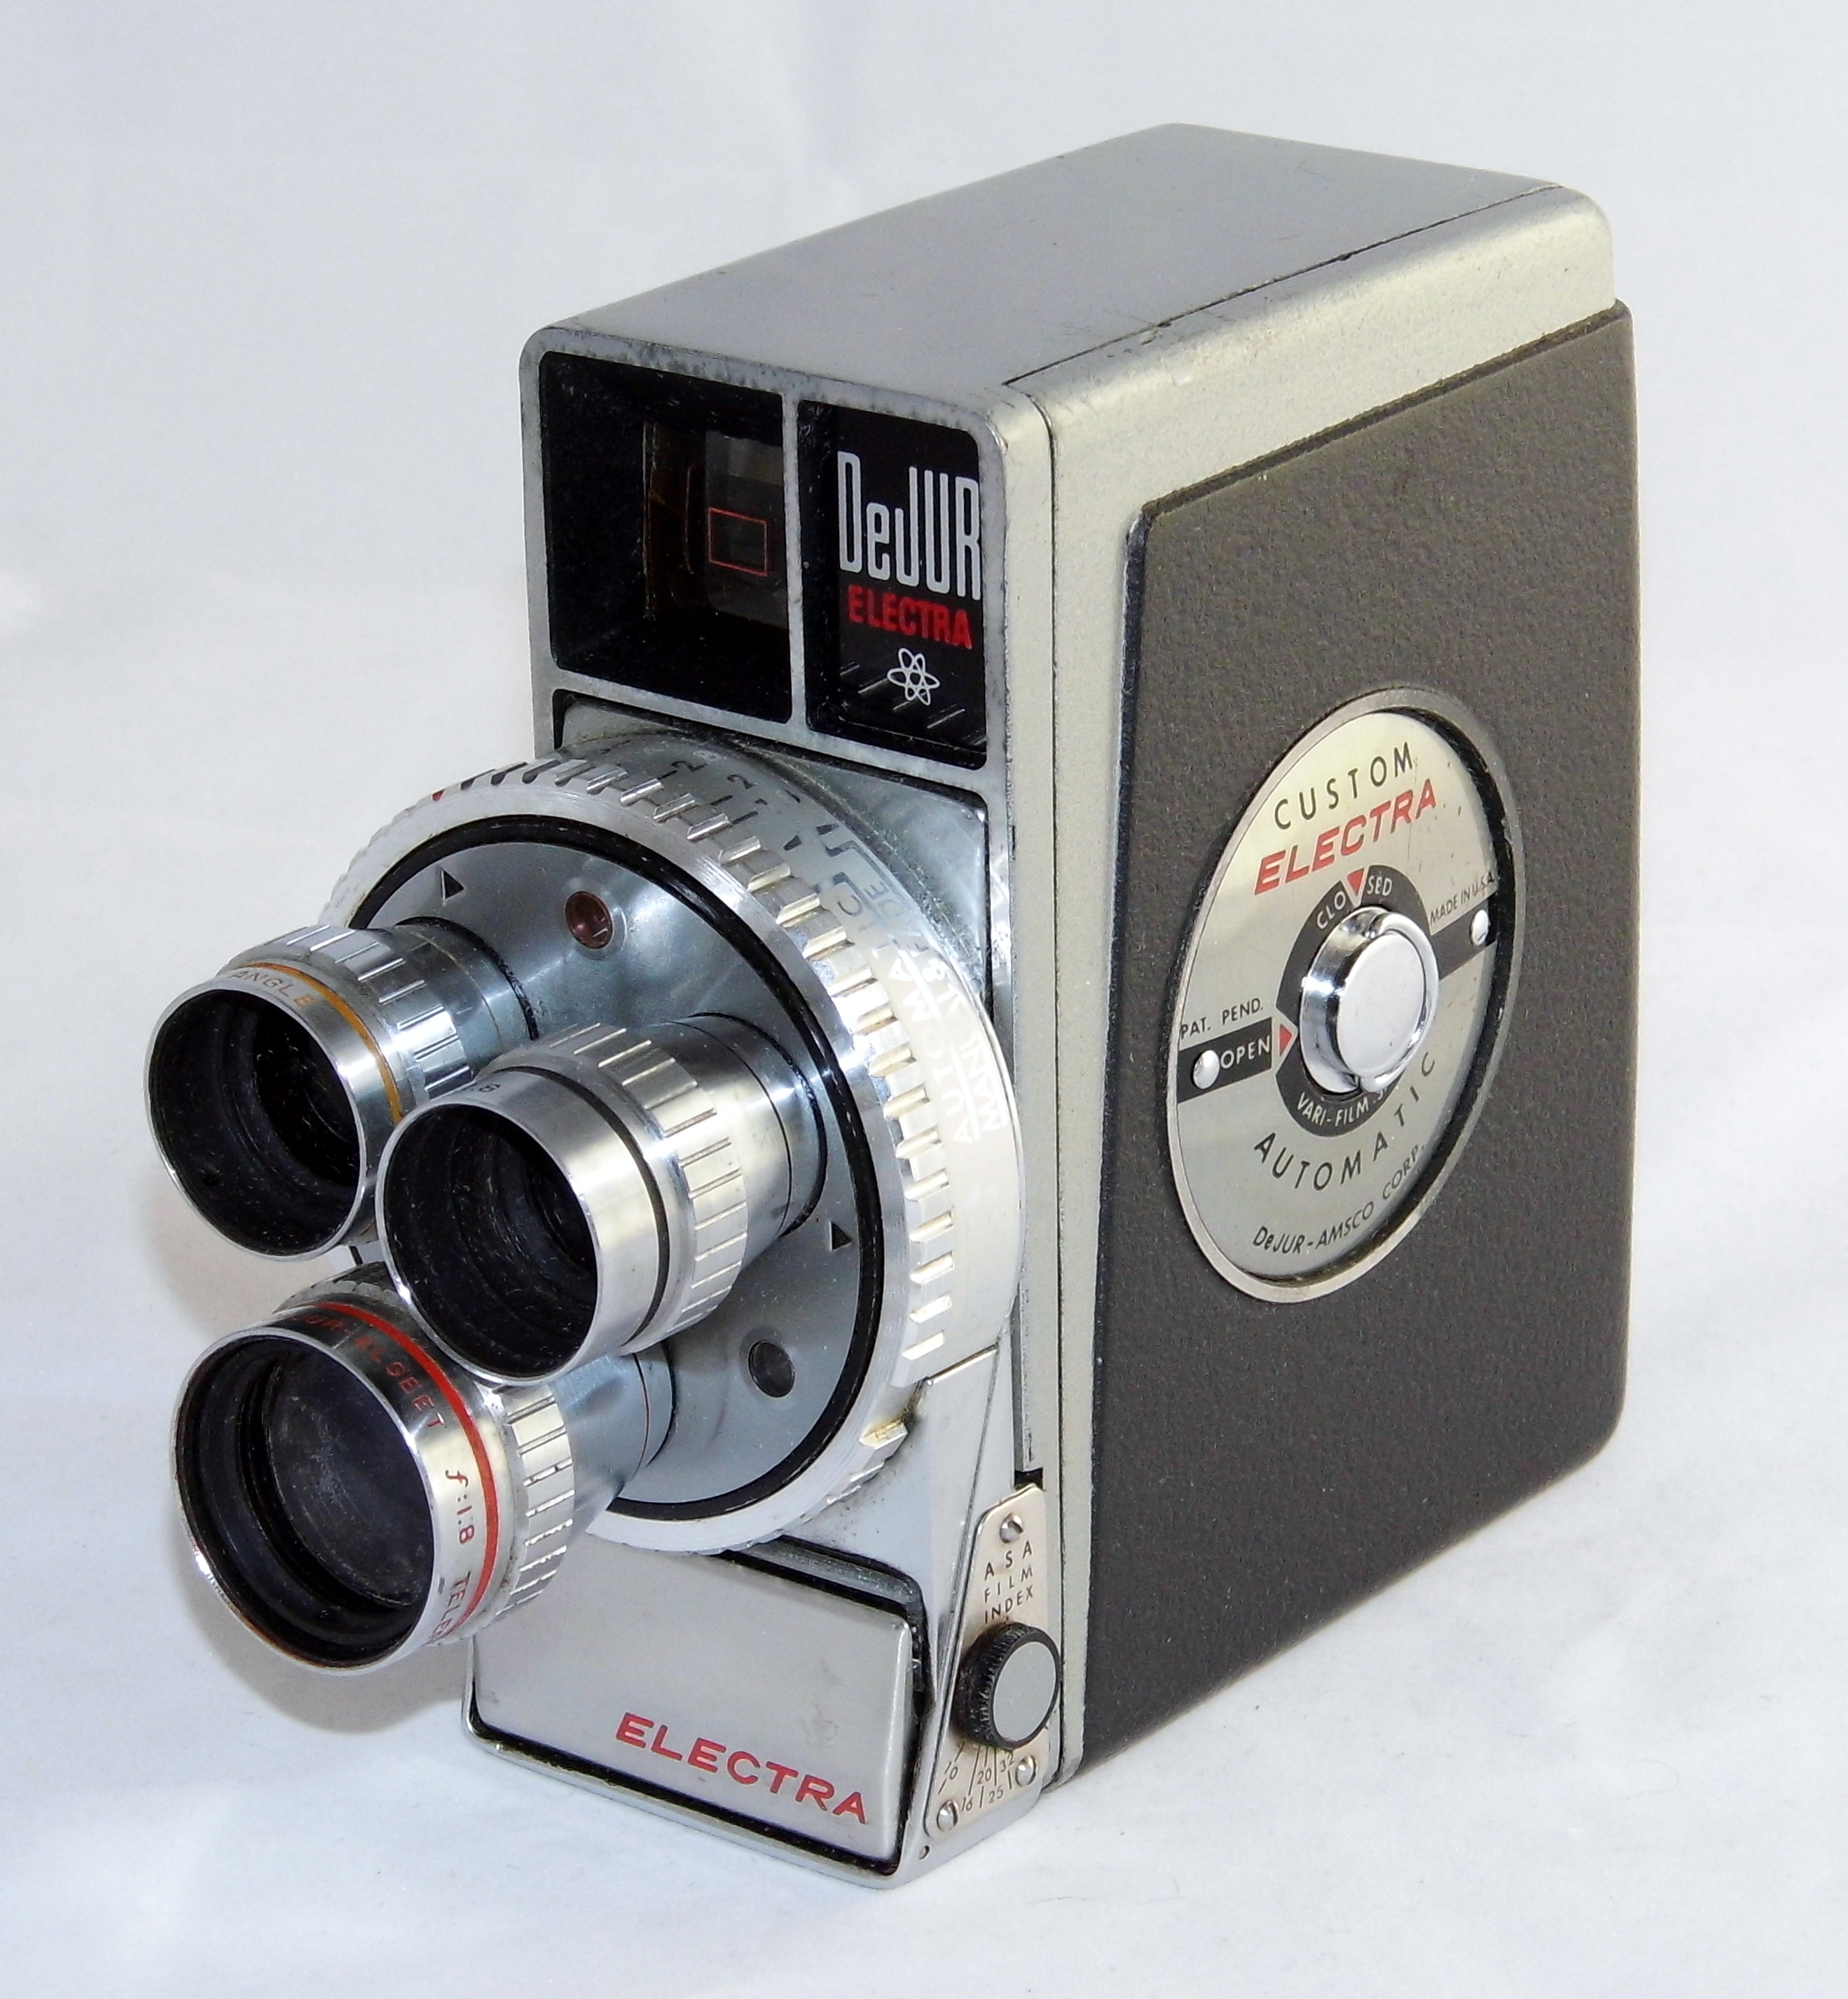 Vintage DeJUR Electra 8mm Movie Camera, Fully Automatic With Three Lens Turret System For Normal, Wide Angle & Telephoto Shots, Electric Eye With Protective Lid, Circa 1958 (17685514914)